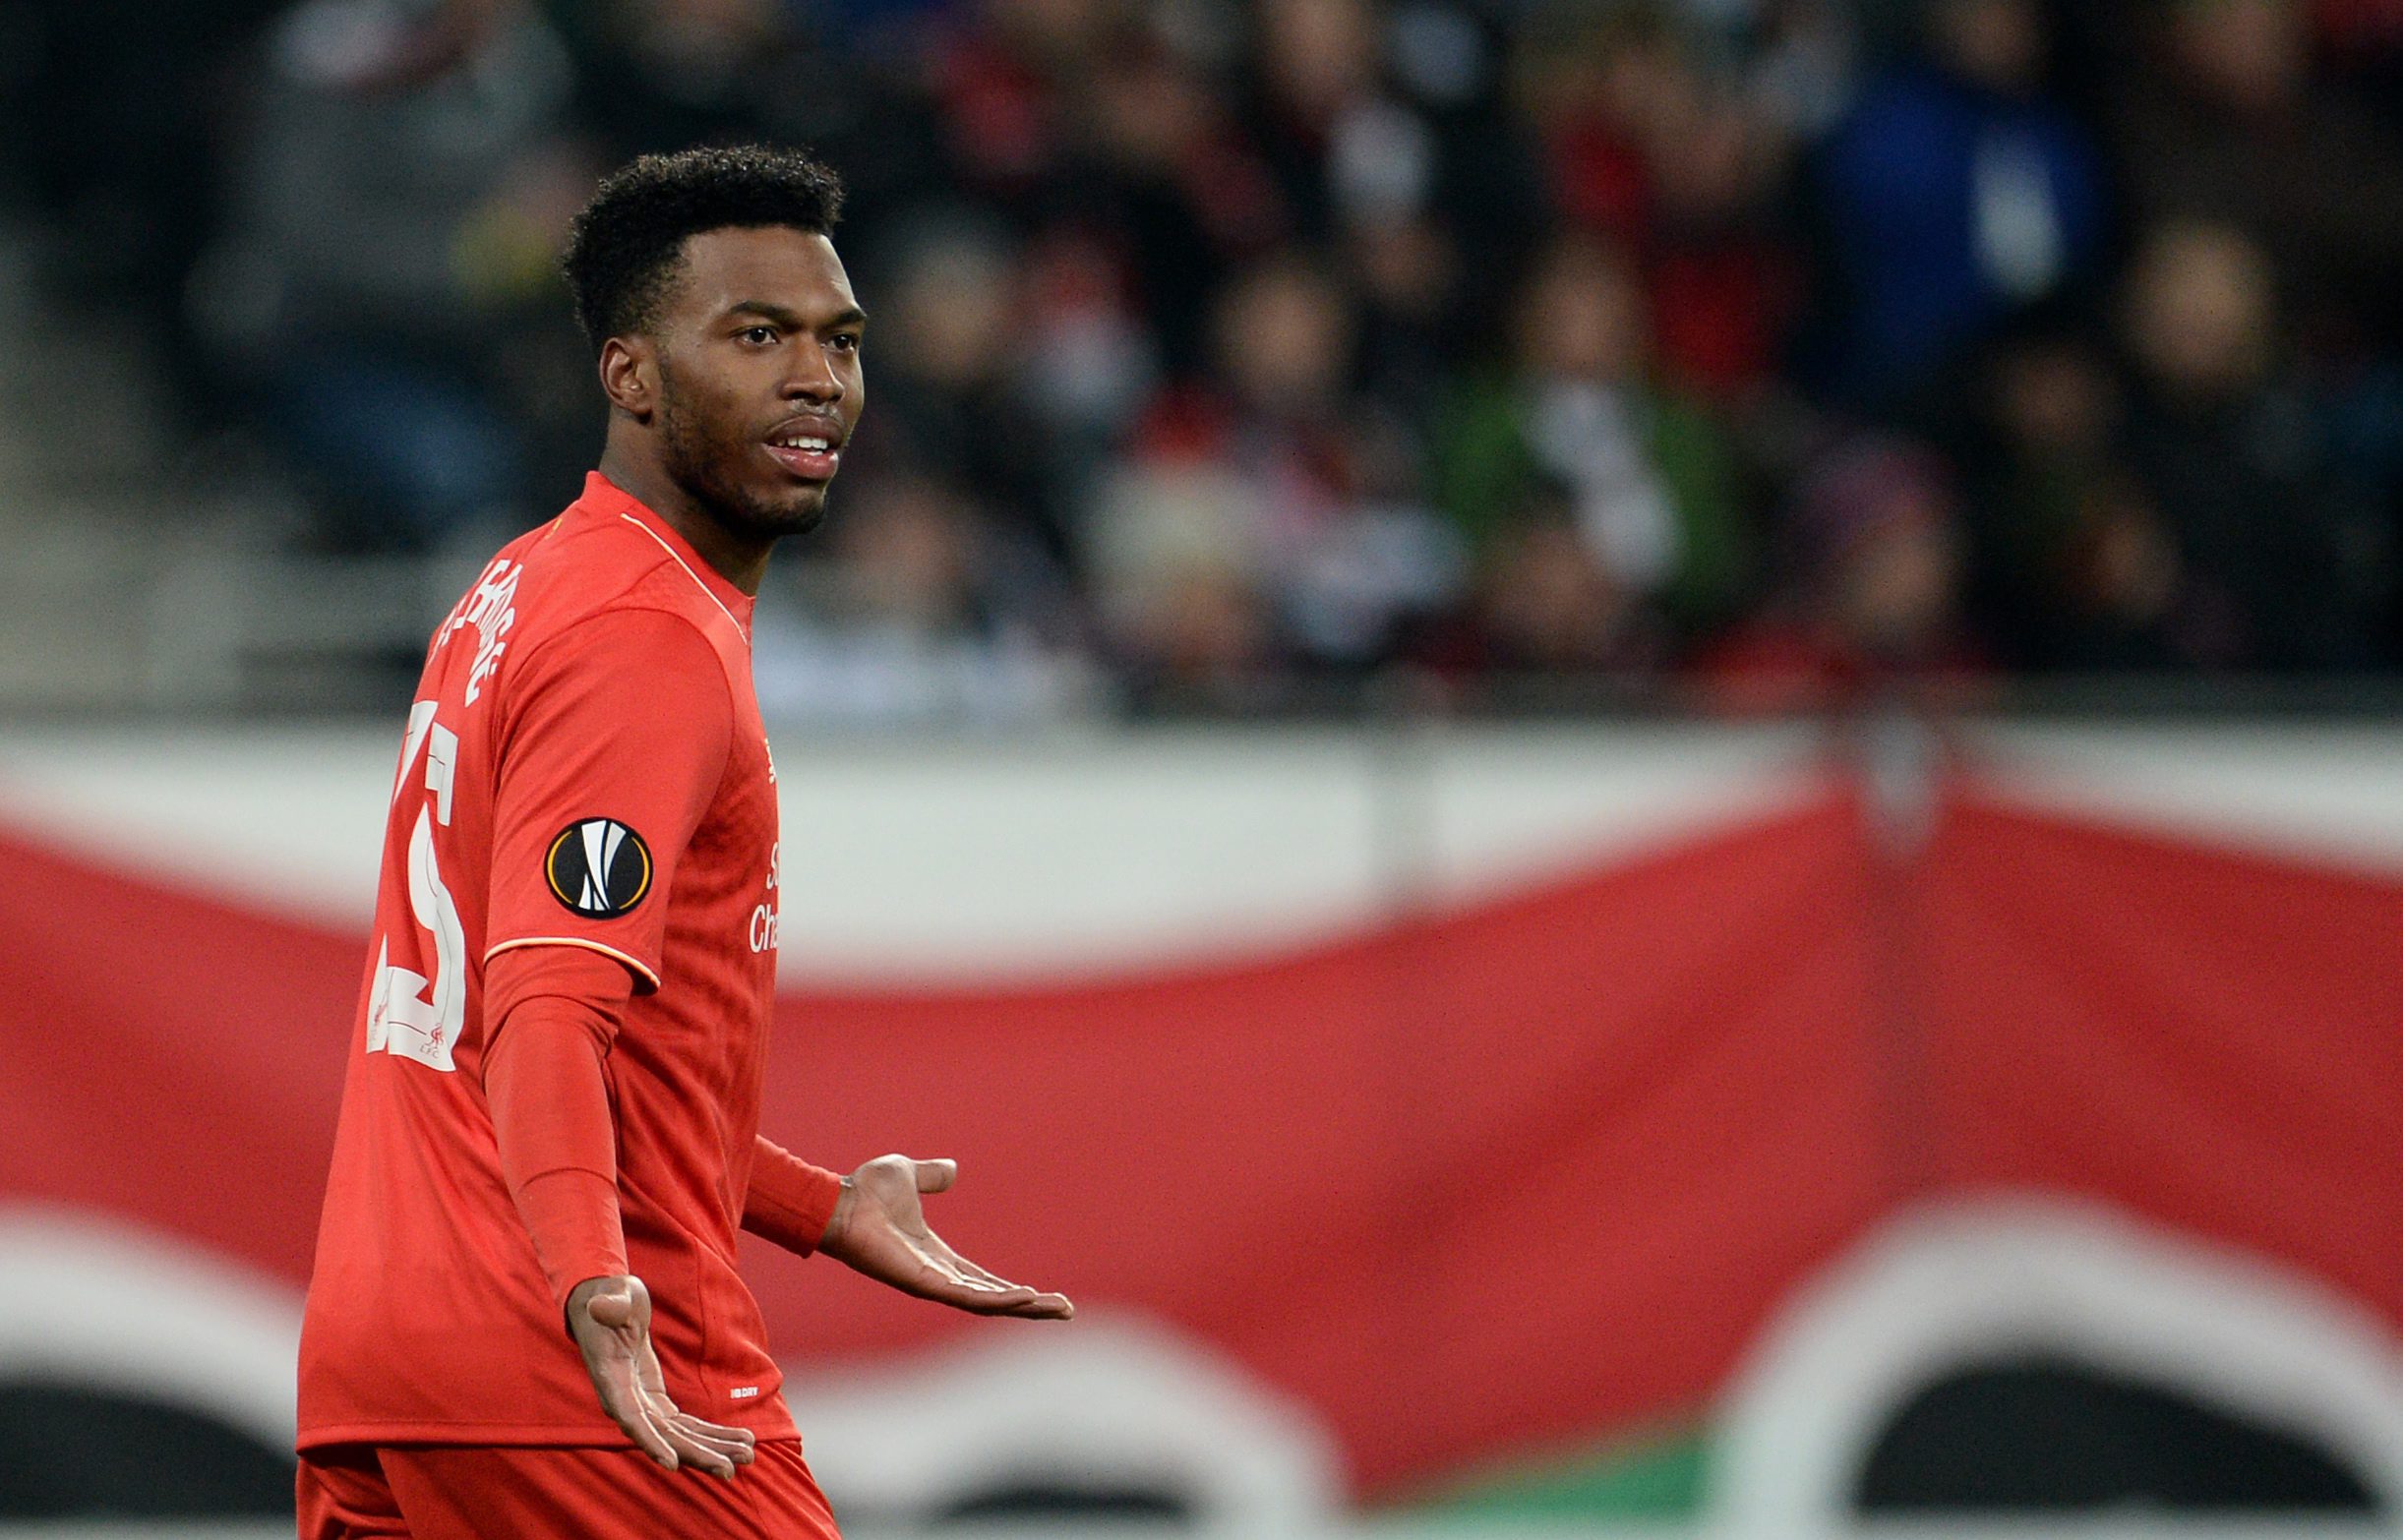 epa05169293 Daniel Sturridge of Liverpool reacts  during the UEFA Europa League Round of 32 soccer match between FC Augsburg and FC Liverpool in Augsburg, Germany, 18 February 2016.  EPA/Andreas Gebert